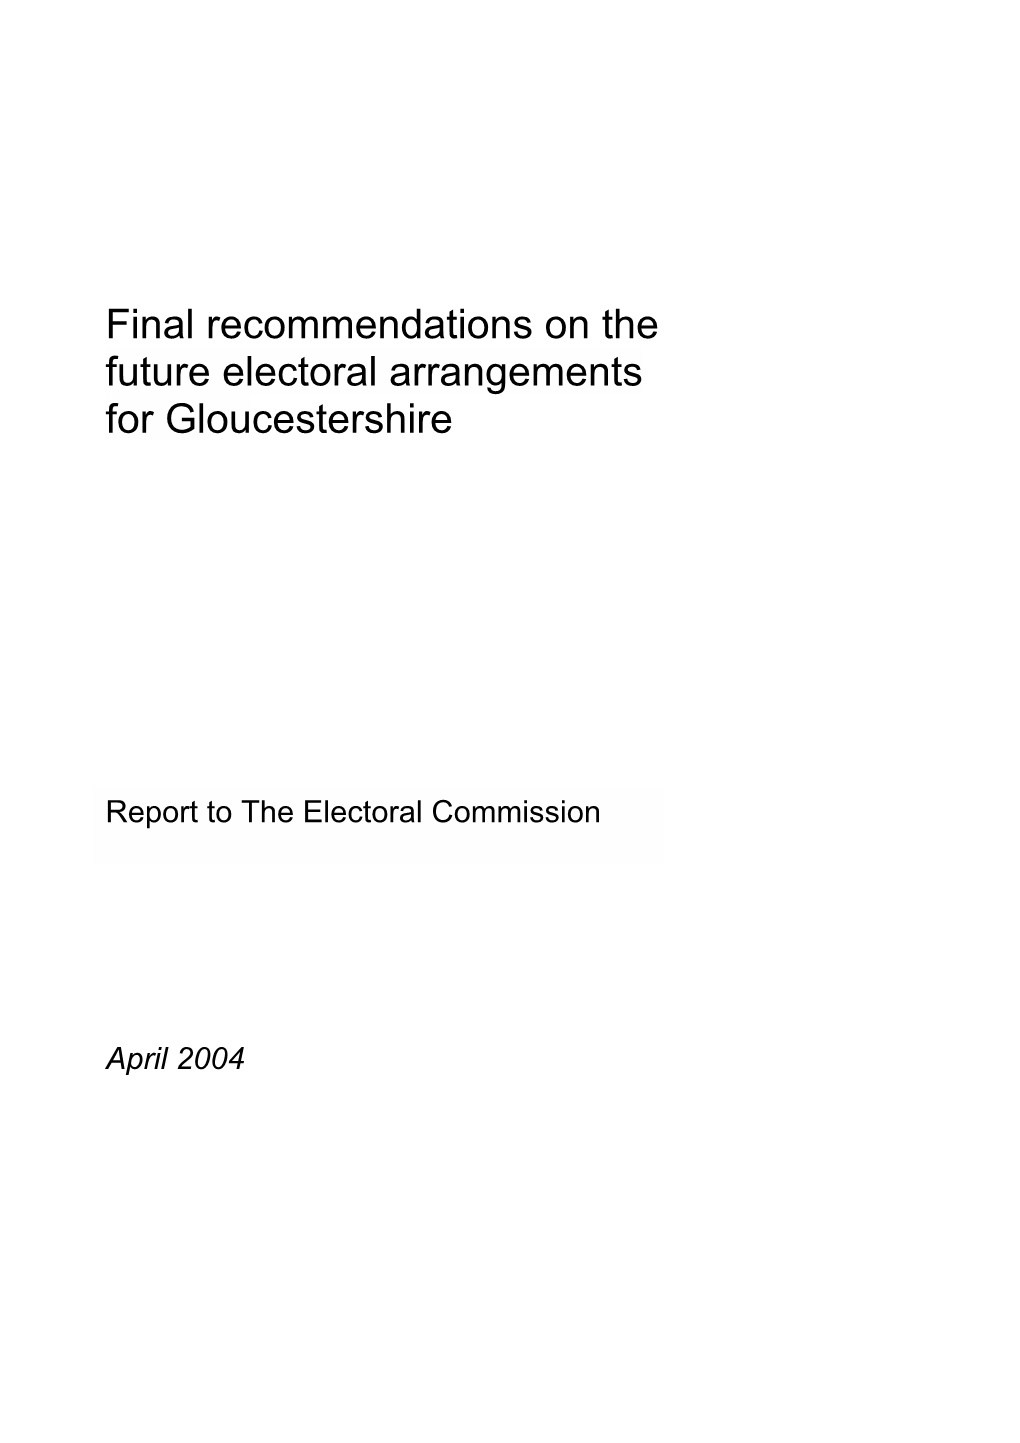 Final Recommendations on the Future Electoral Arrangements for Gloucestershire